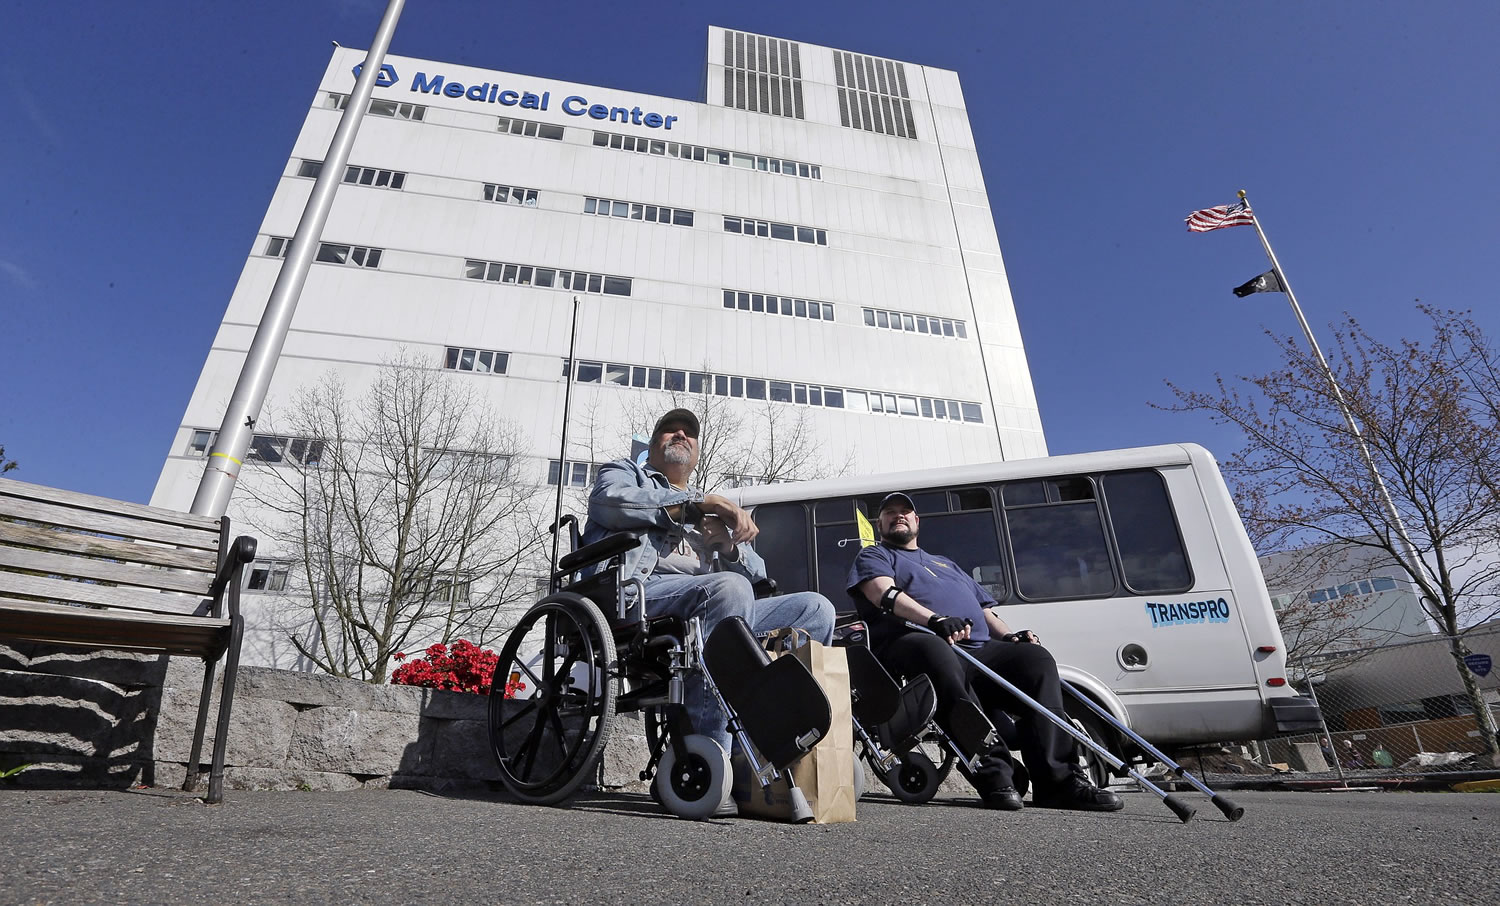 Army veteran Michael Thrun, left, and Navy veteran Thomas Berry sit in wheelchairs as they wait for their rides following treatment at the Veterans Administration Puget Sound Medical Center in Seattle.